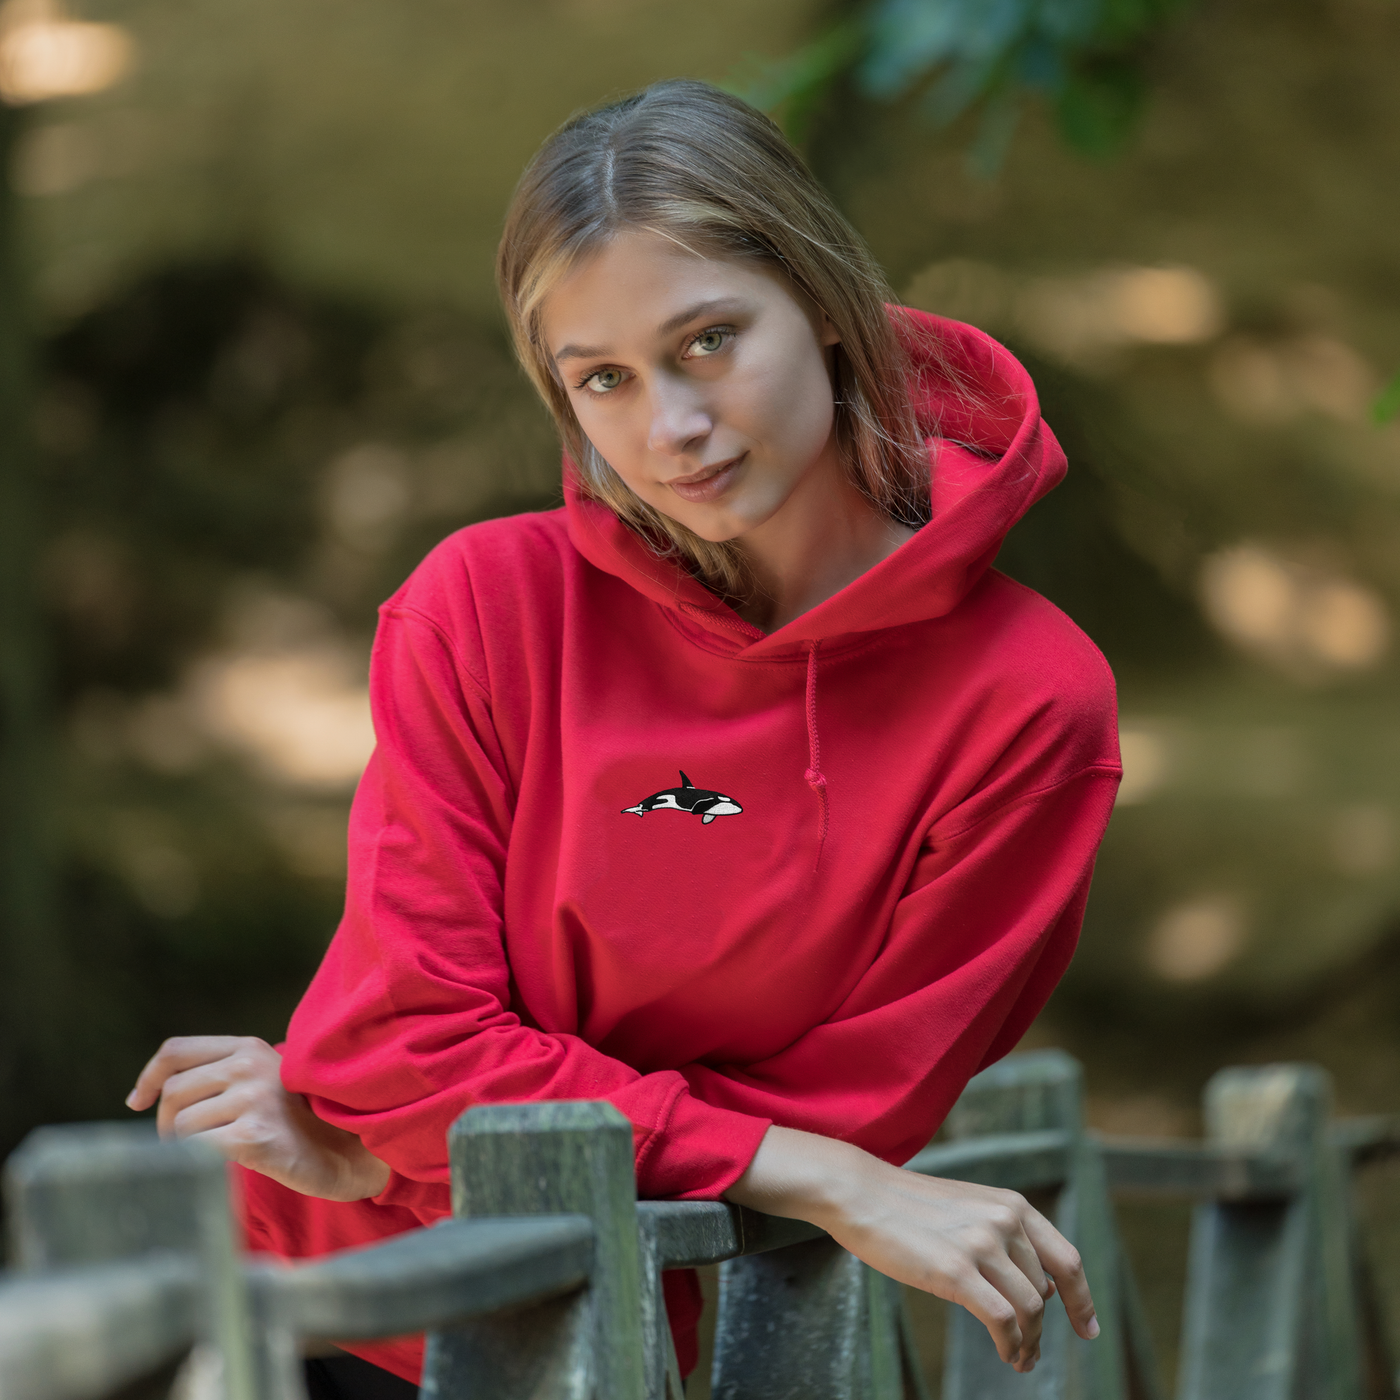 Bobby's Planet Women's Embroidered Orca Hoodie from Seven Seas Fish Animals Collection in Red Color#color_red